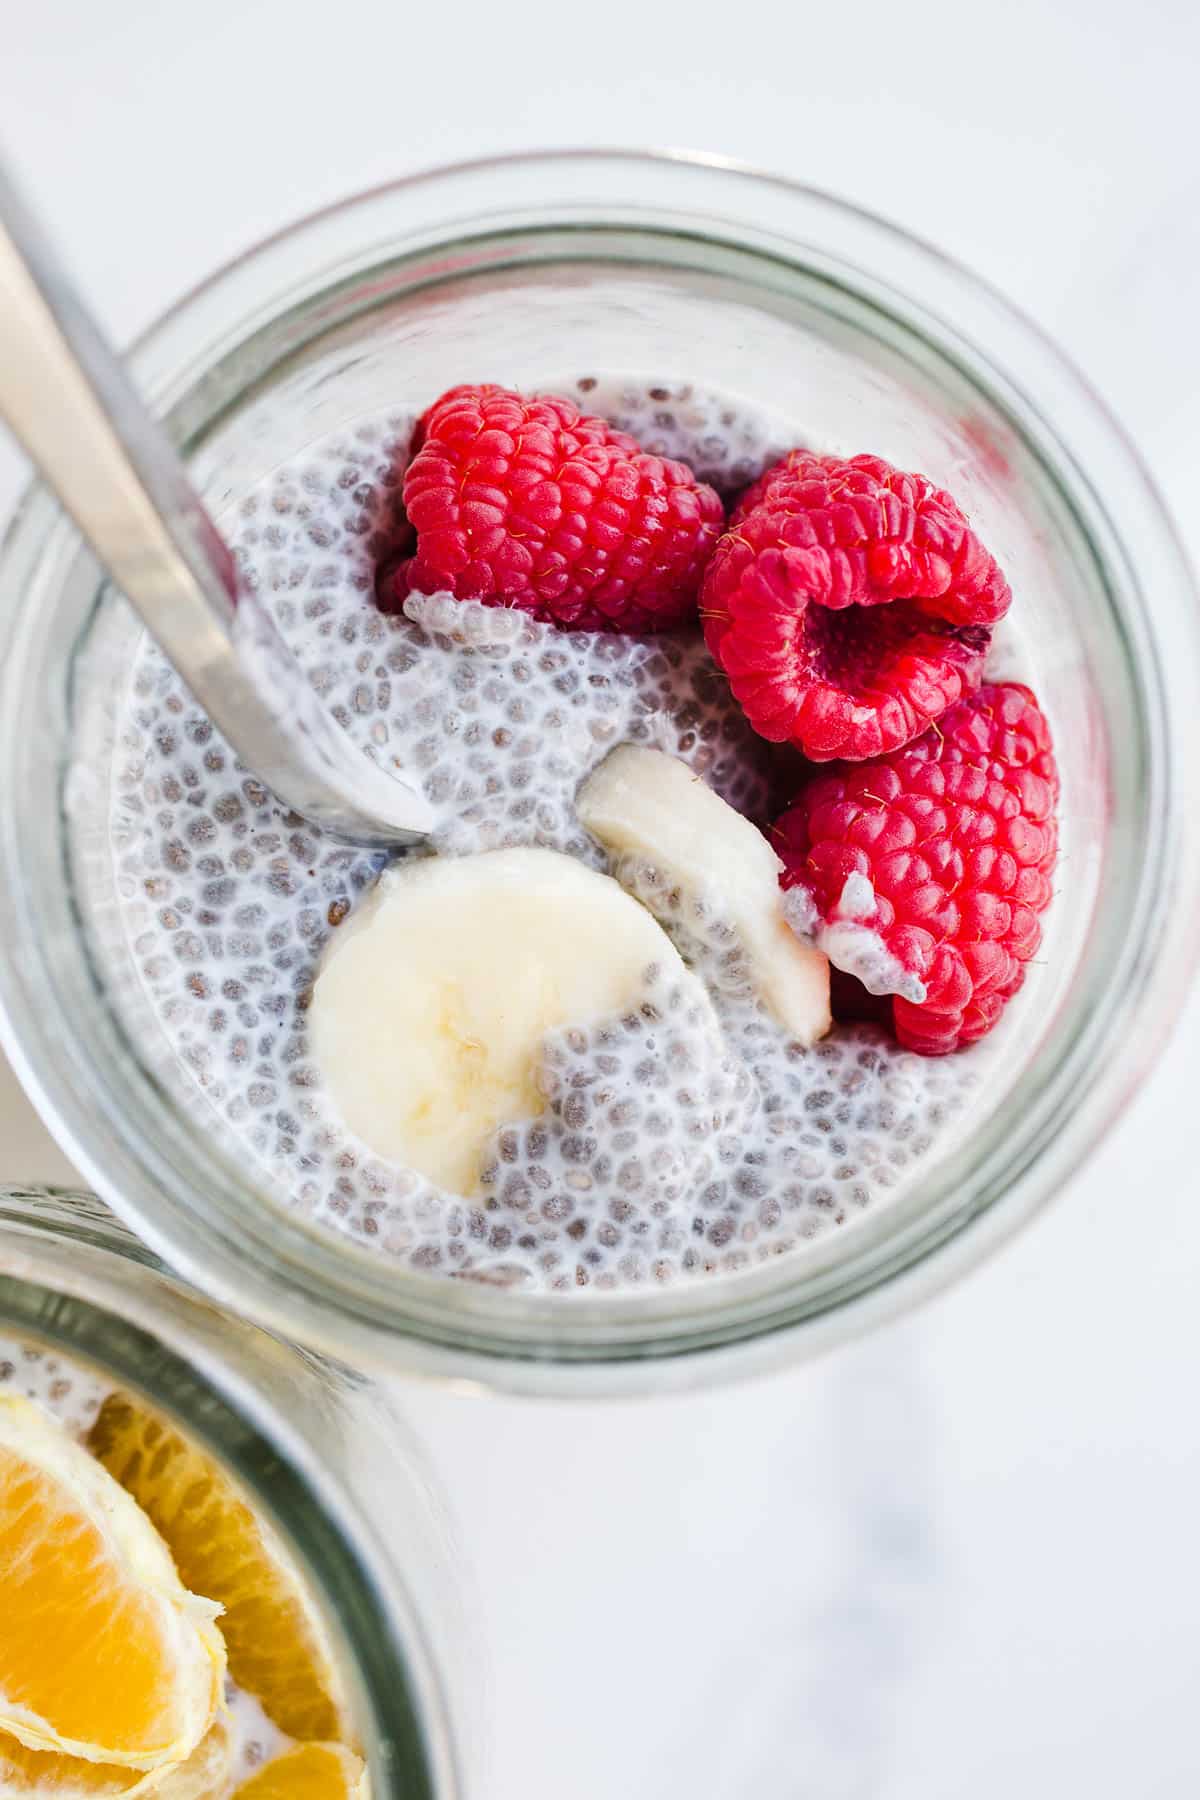 A jar filled with pudding and topped with fresh raspberries and bananas to display a recipe that could use a chia seed substitute.